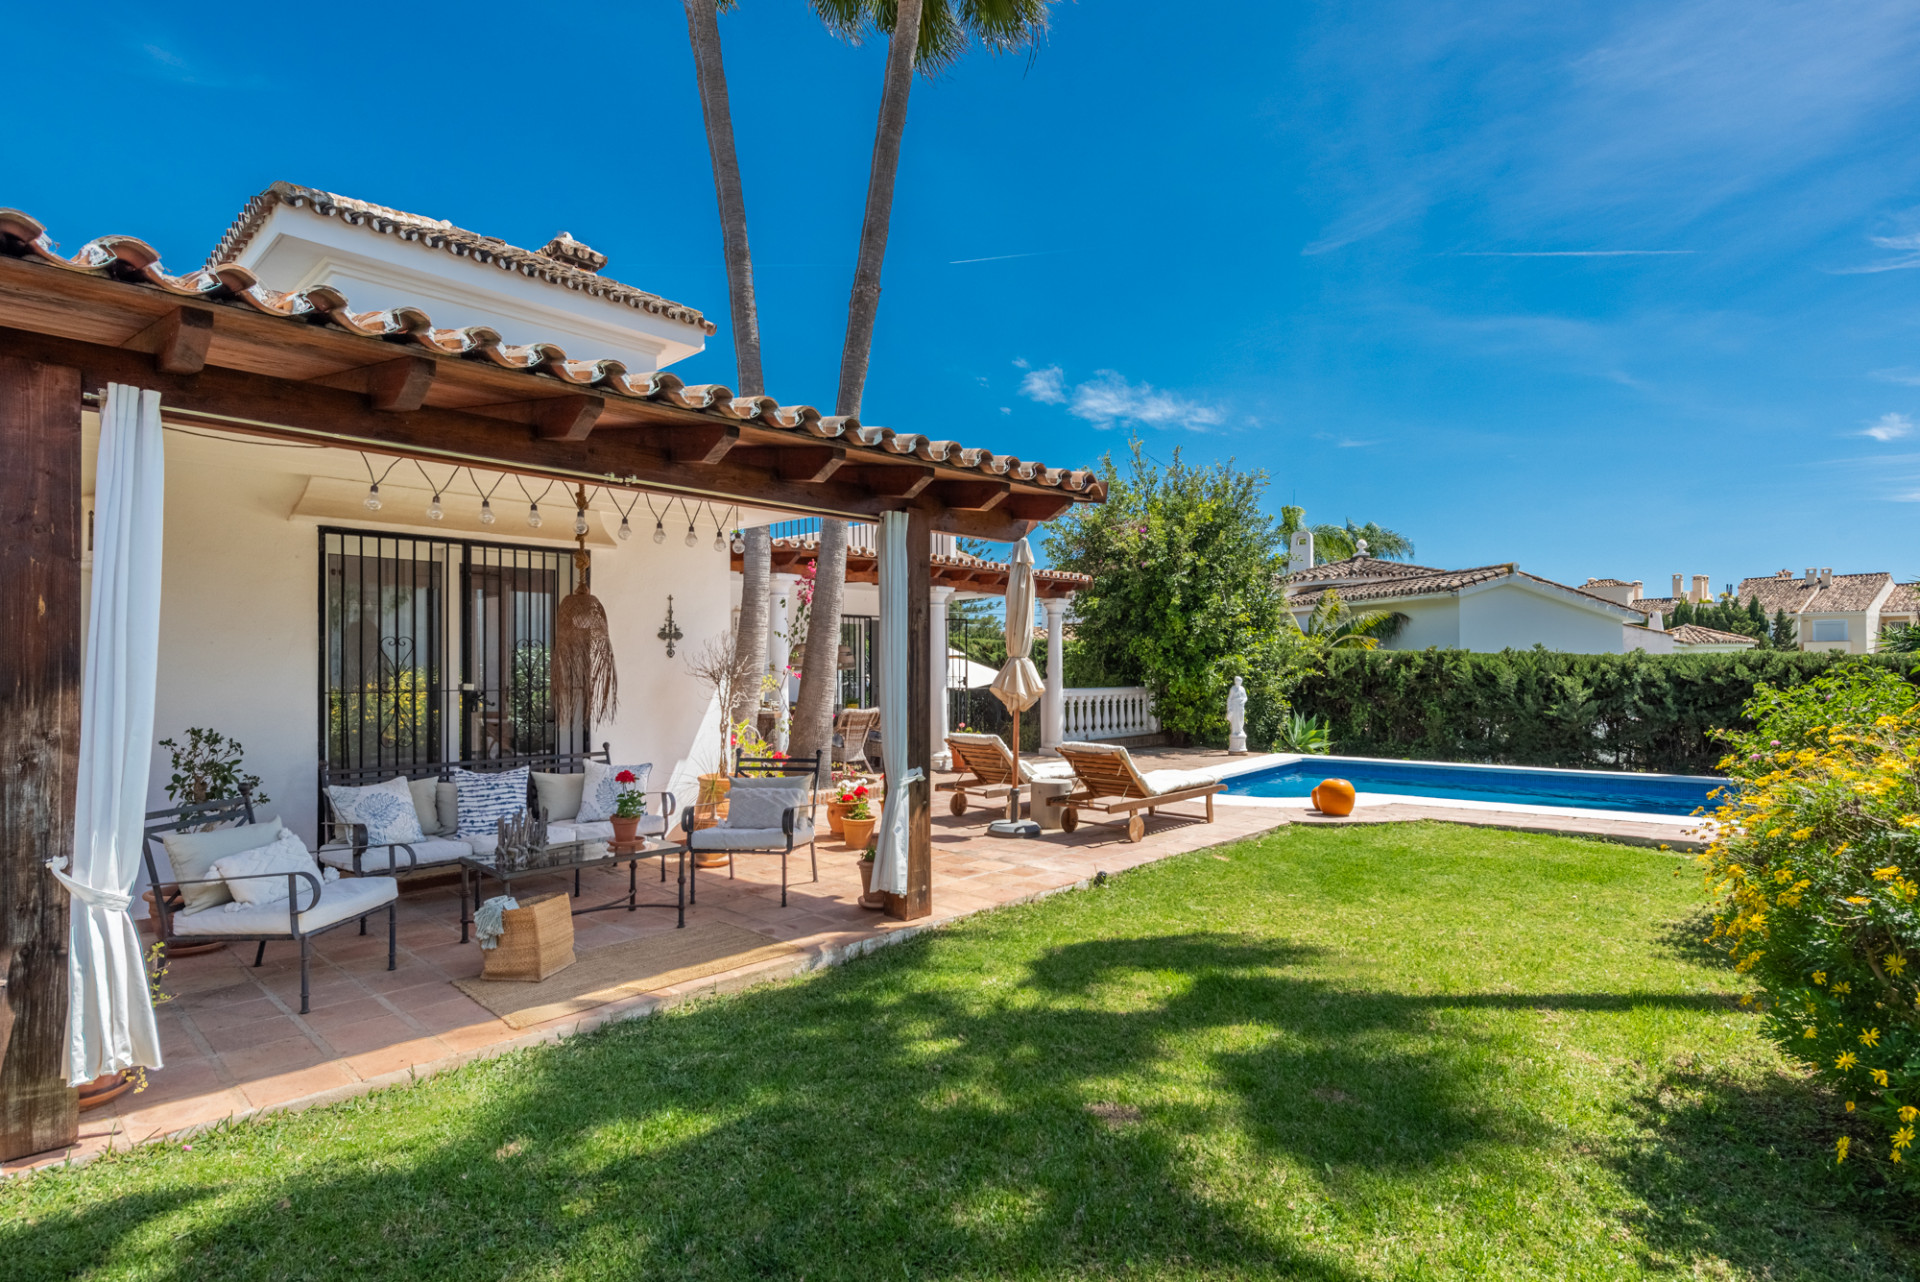 Very pretty villa with an enchanting garden located within walking distance to shops, restaurants and the beach!